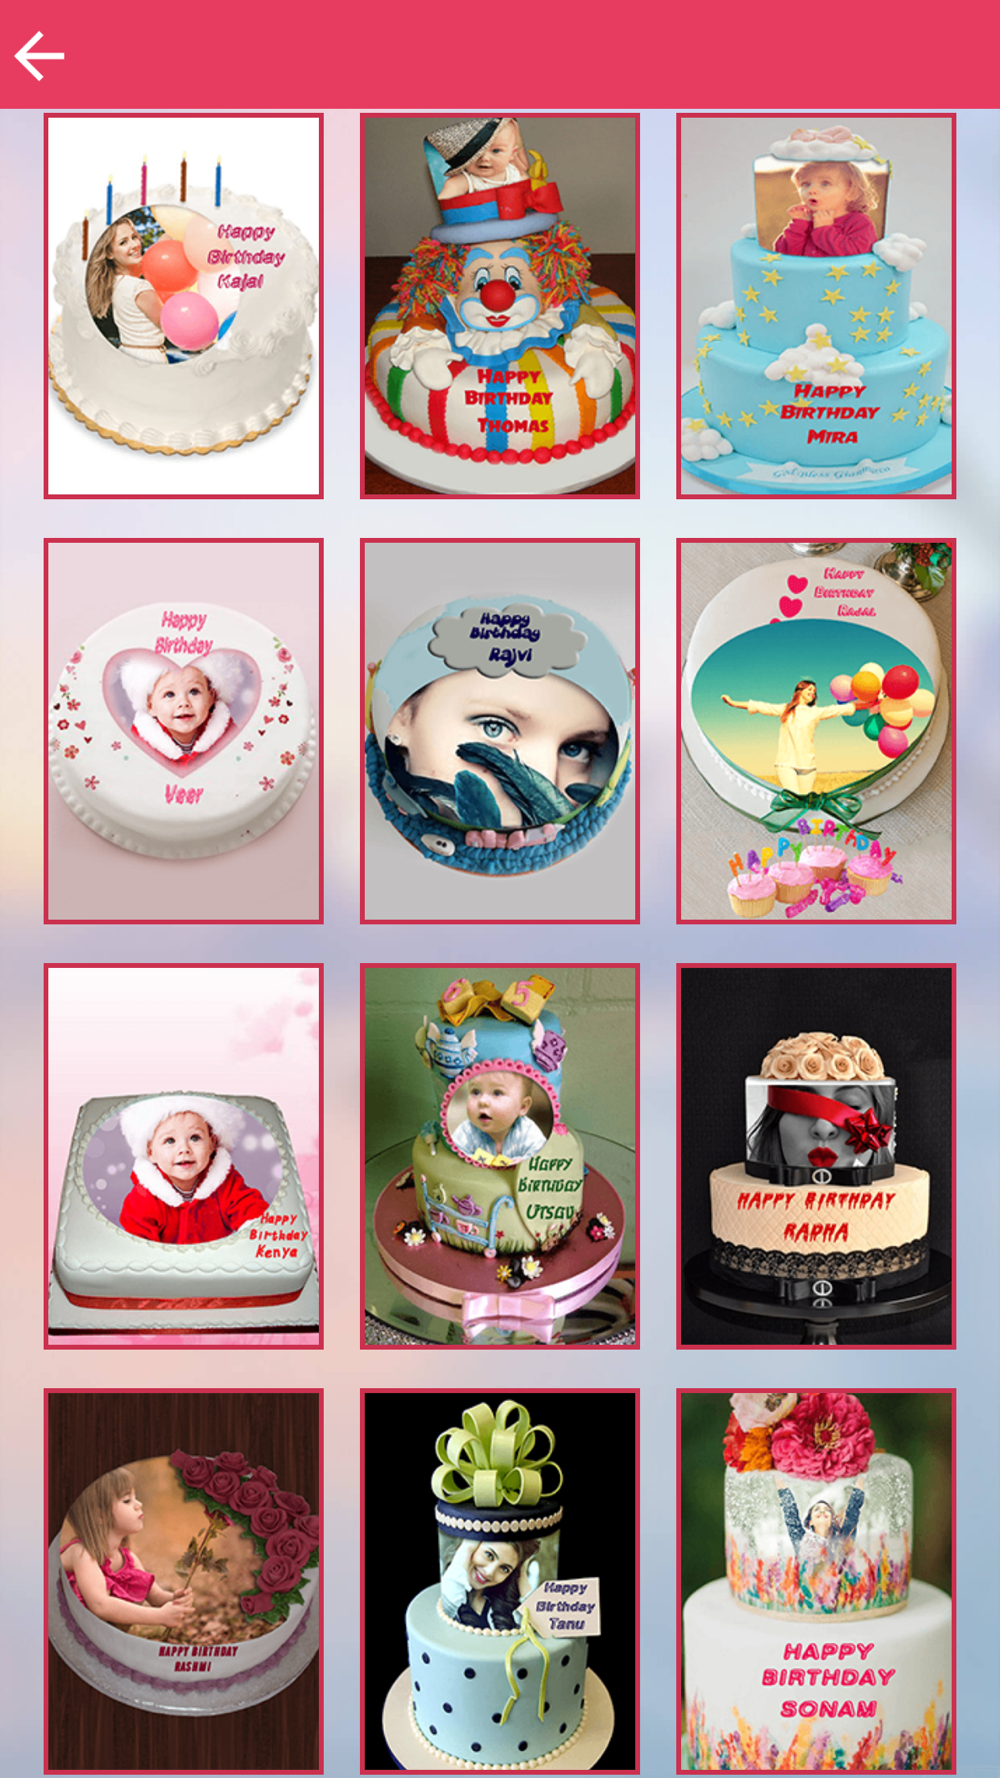 Name And Photo On Birthday Cake Free Download App For Iphone Steprimo Com